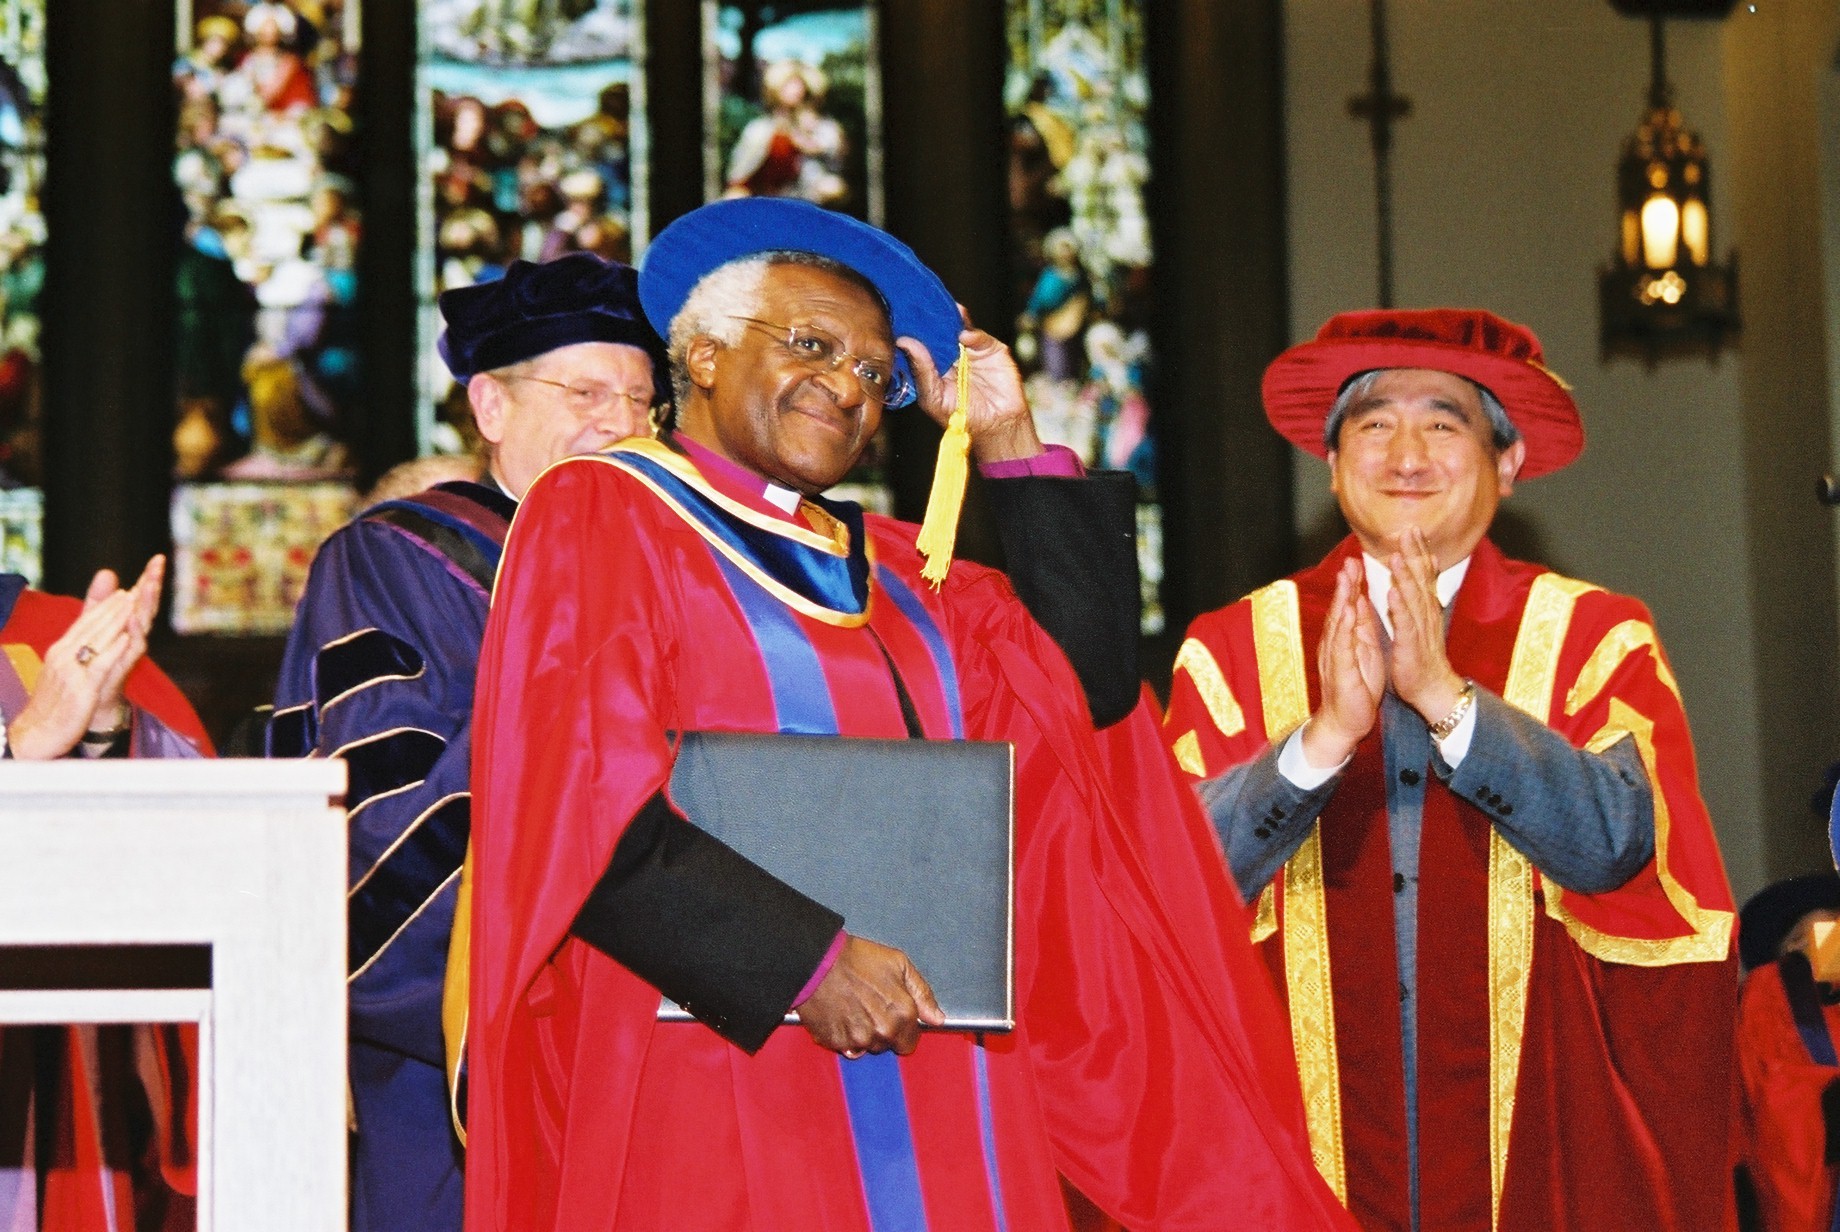 South African Archbishop Desmond Tutu receives honourary doctorate from SFU